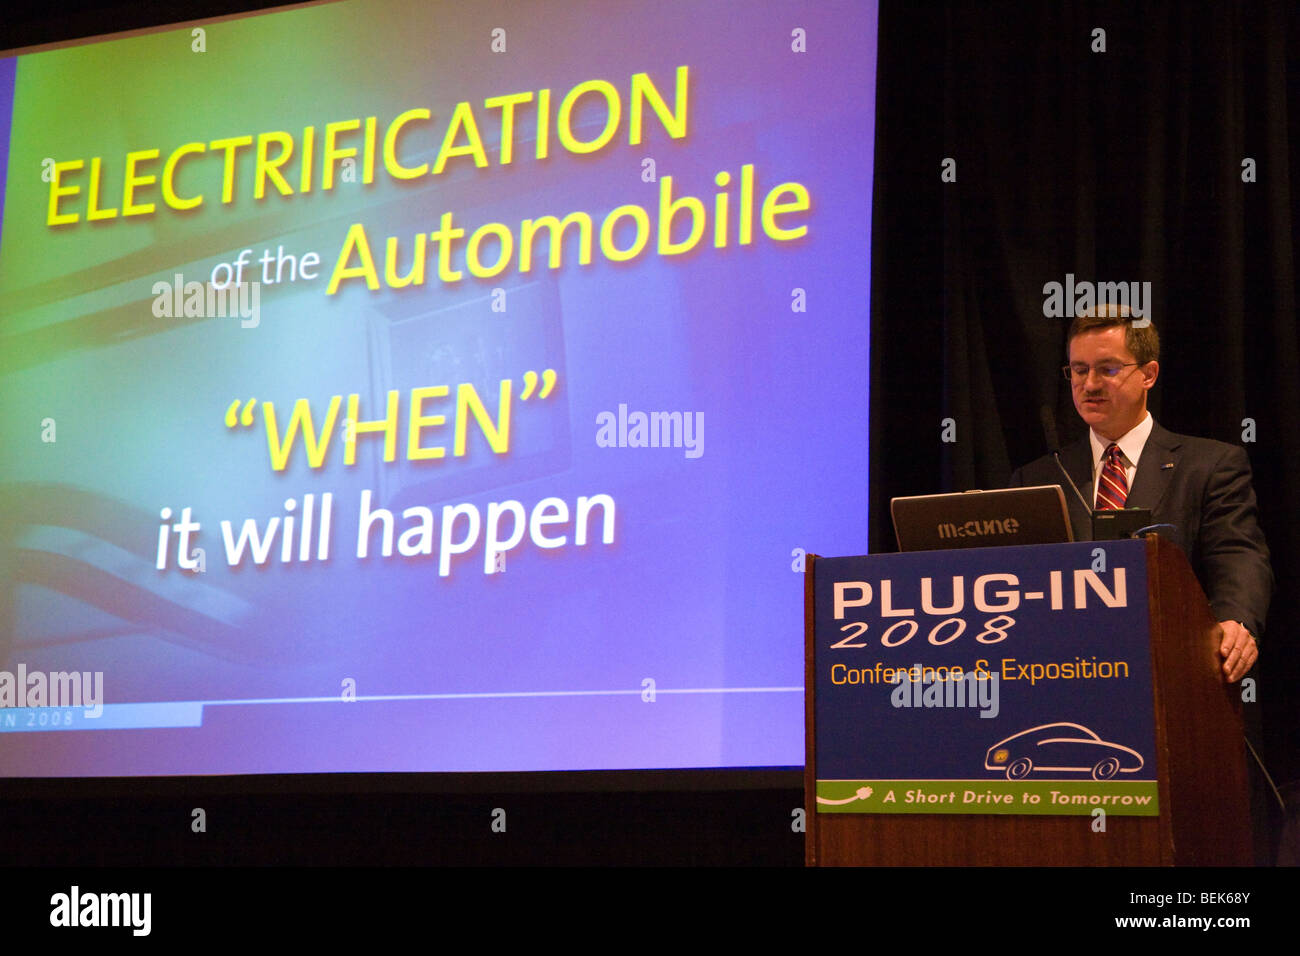 Jonathan Lauckner, Vice President, Global Program Management, GM, giving a speech at Plug-In 2008 Conference & Exposition Stock Photo